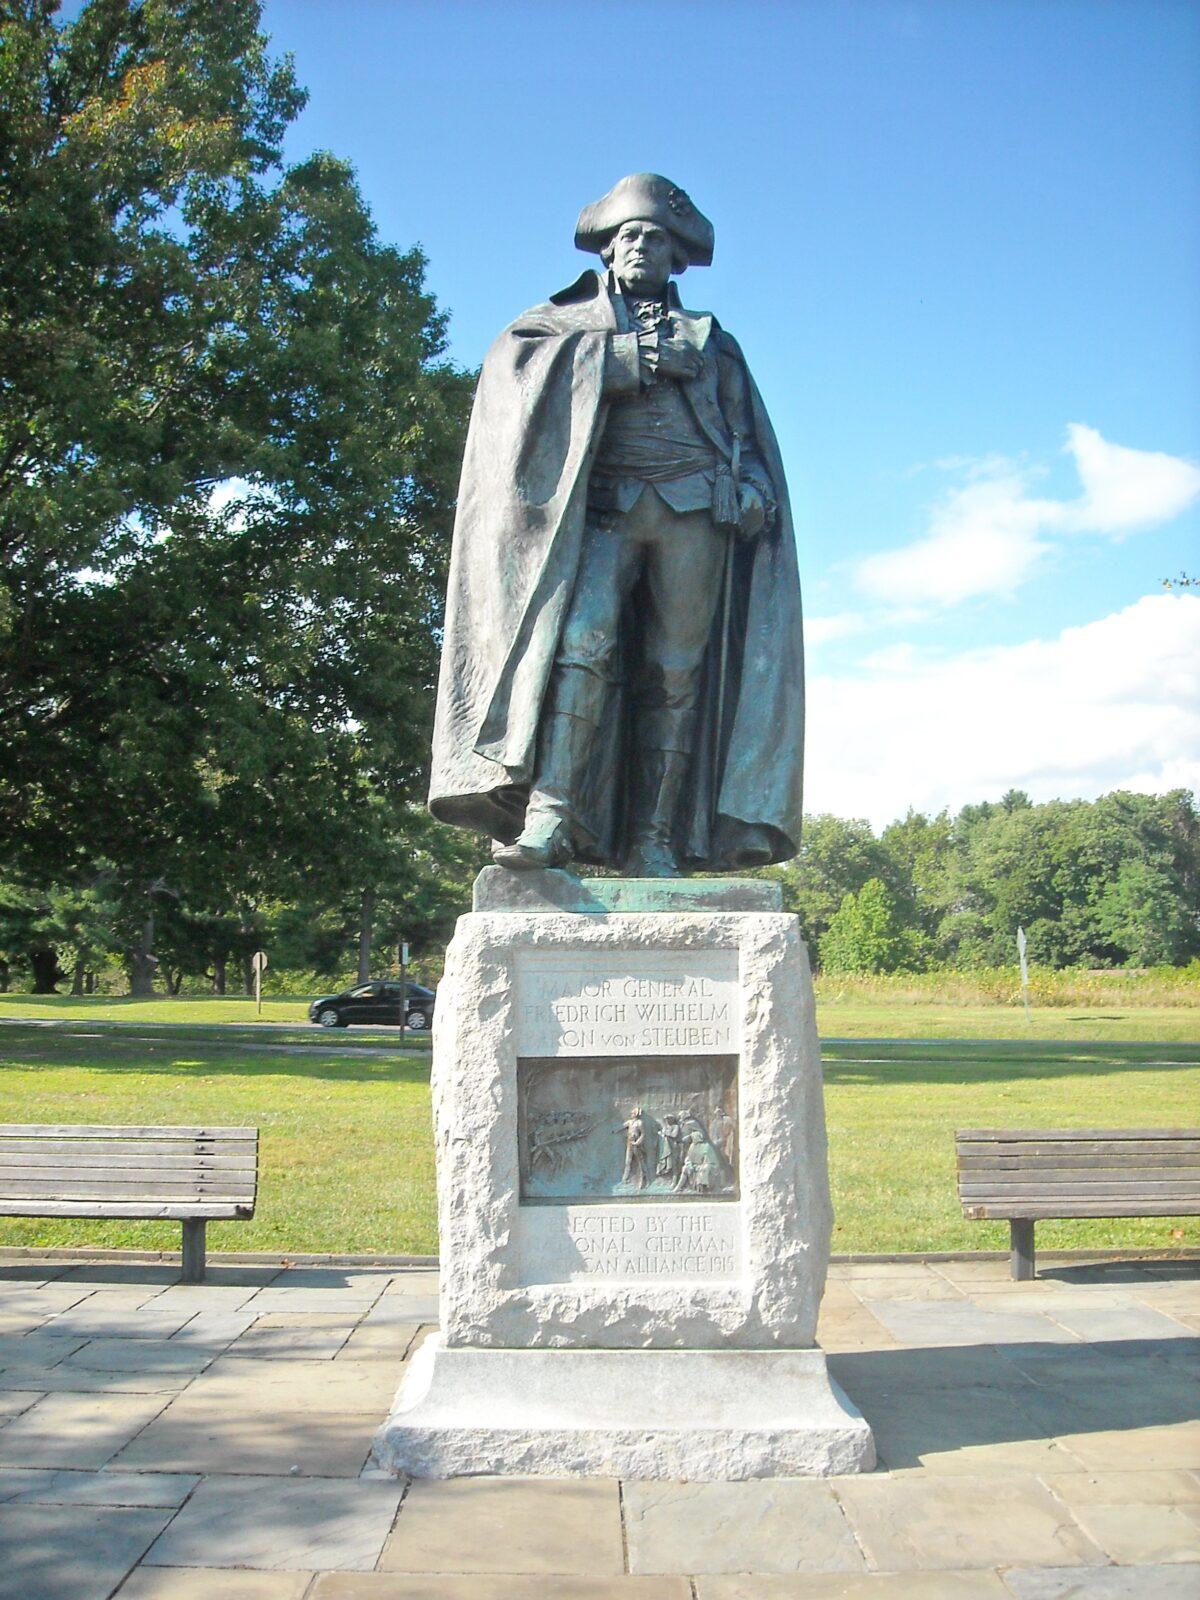 Statue of Baron von Steuben, Valley Forge National Historical Park, Penn. (MPHaas/CC BY-SA 4.0)